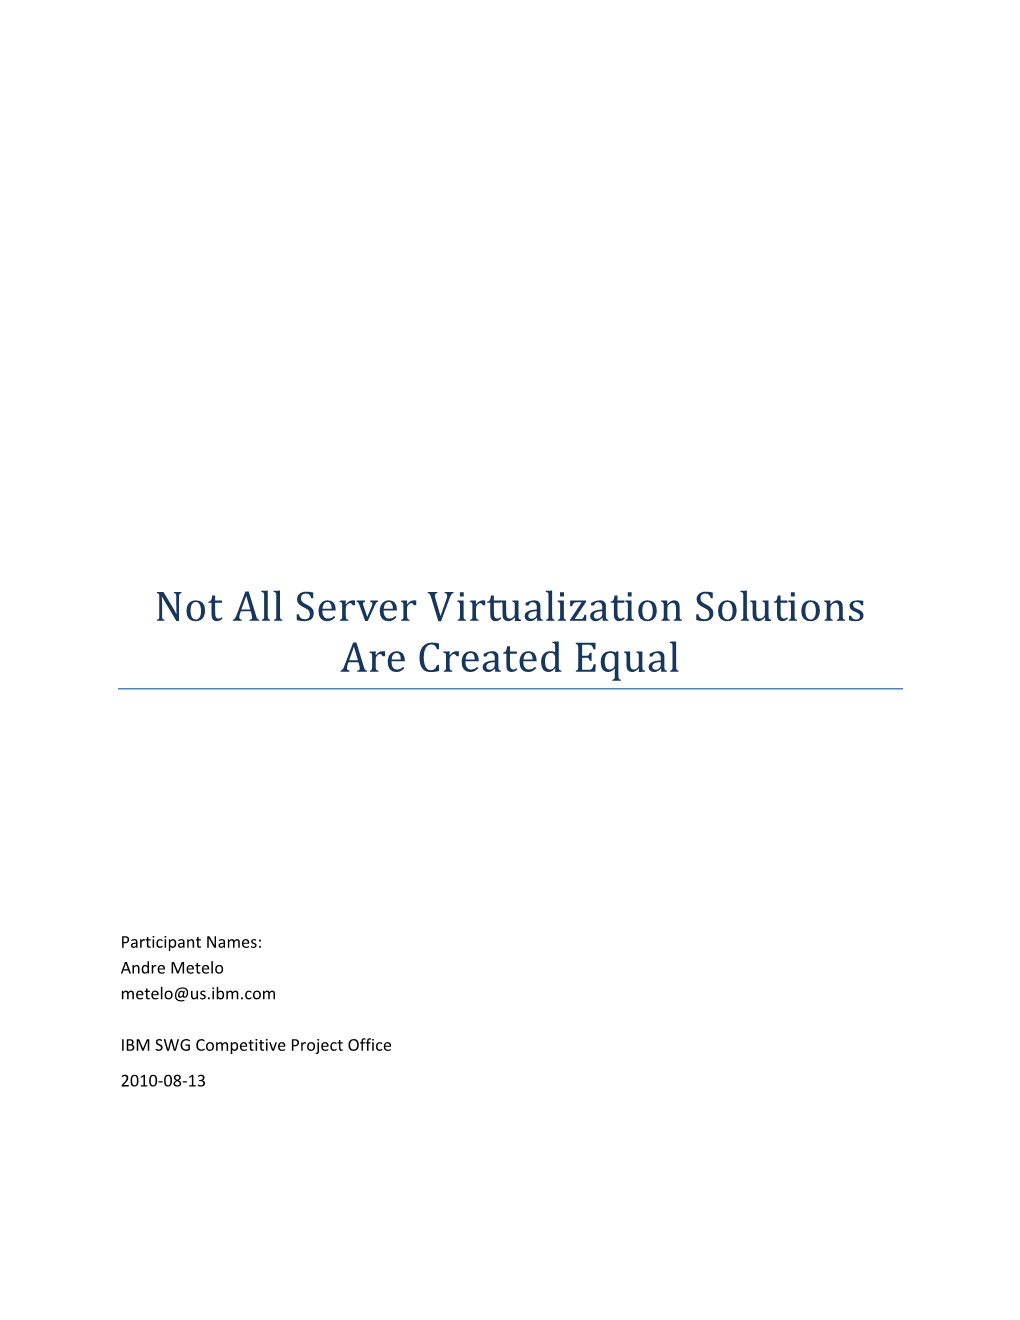 Not All Server Virtualization Solutions Are Created Equal